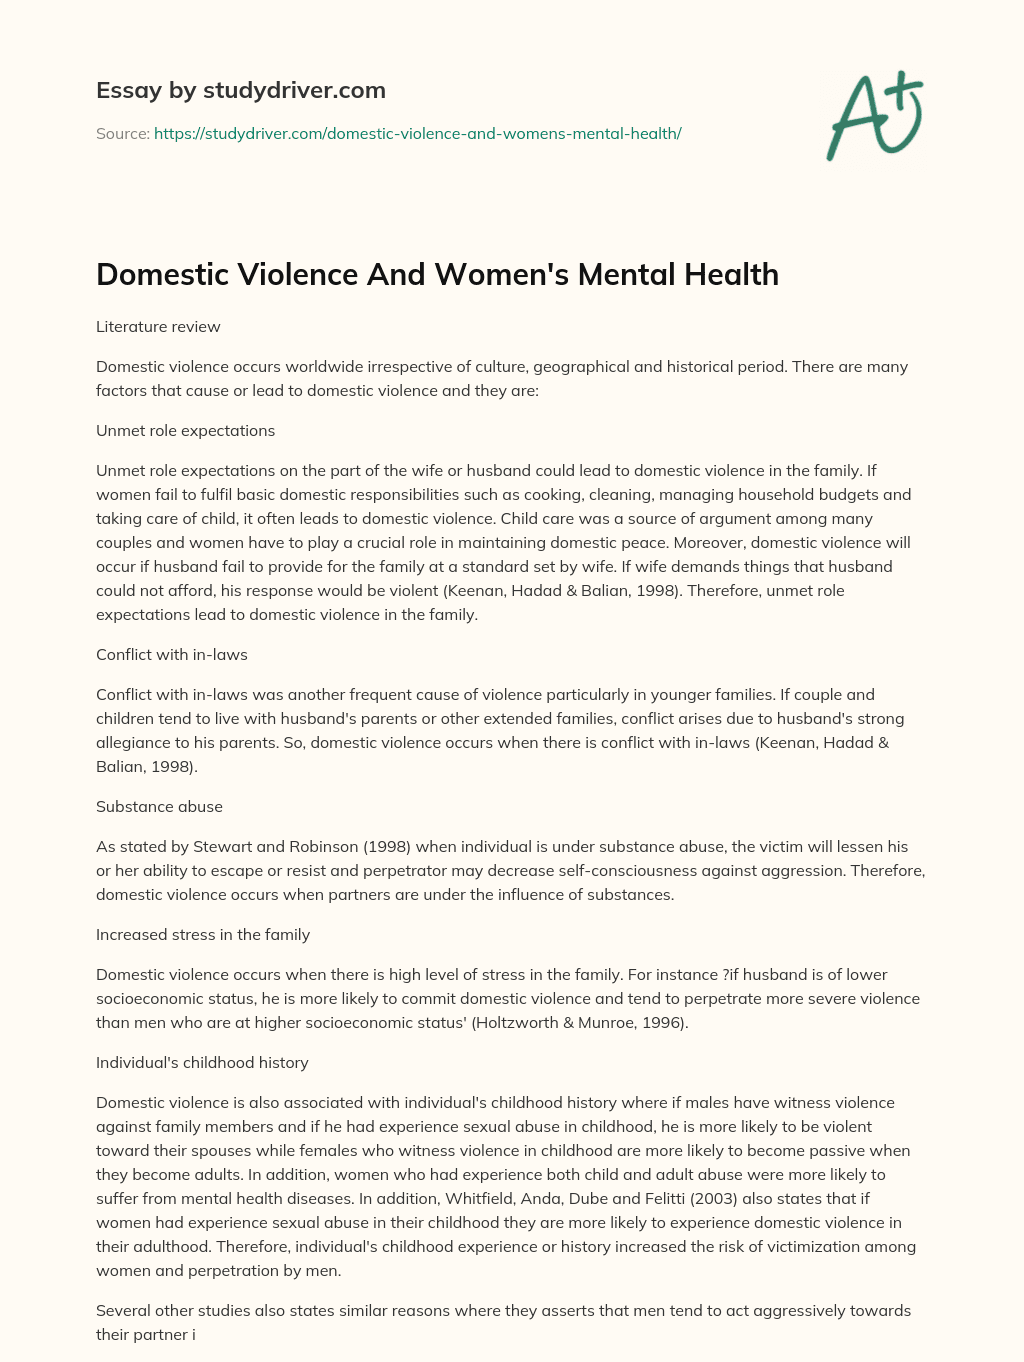 Domestic Violence and Women’s Mental Health essay